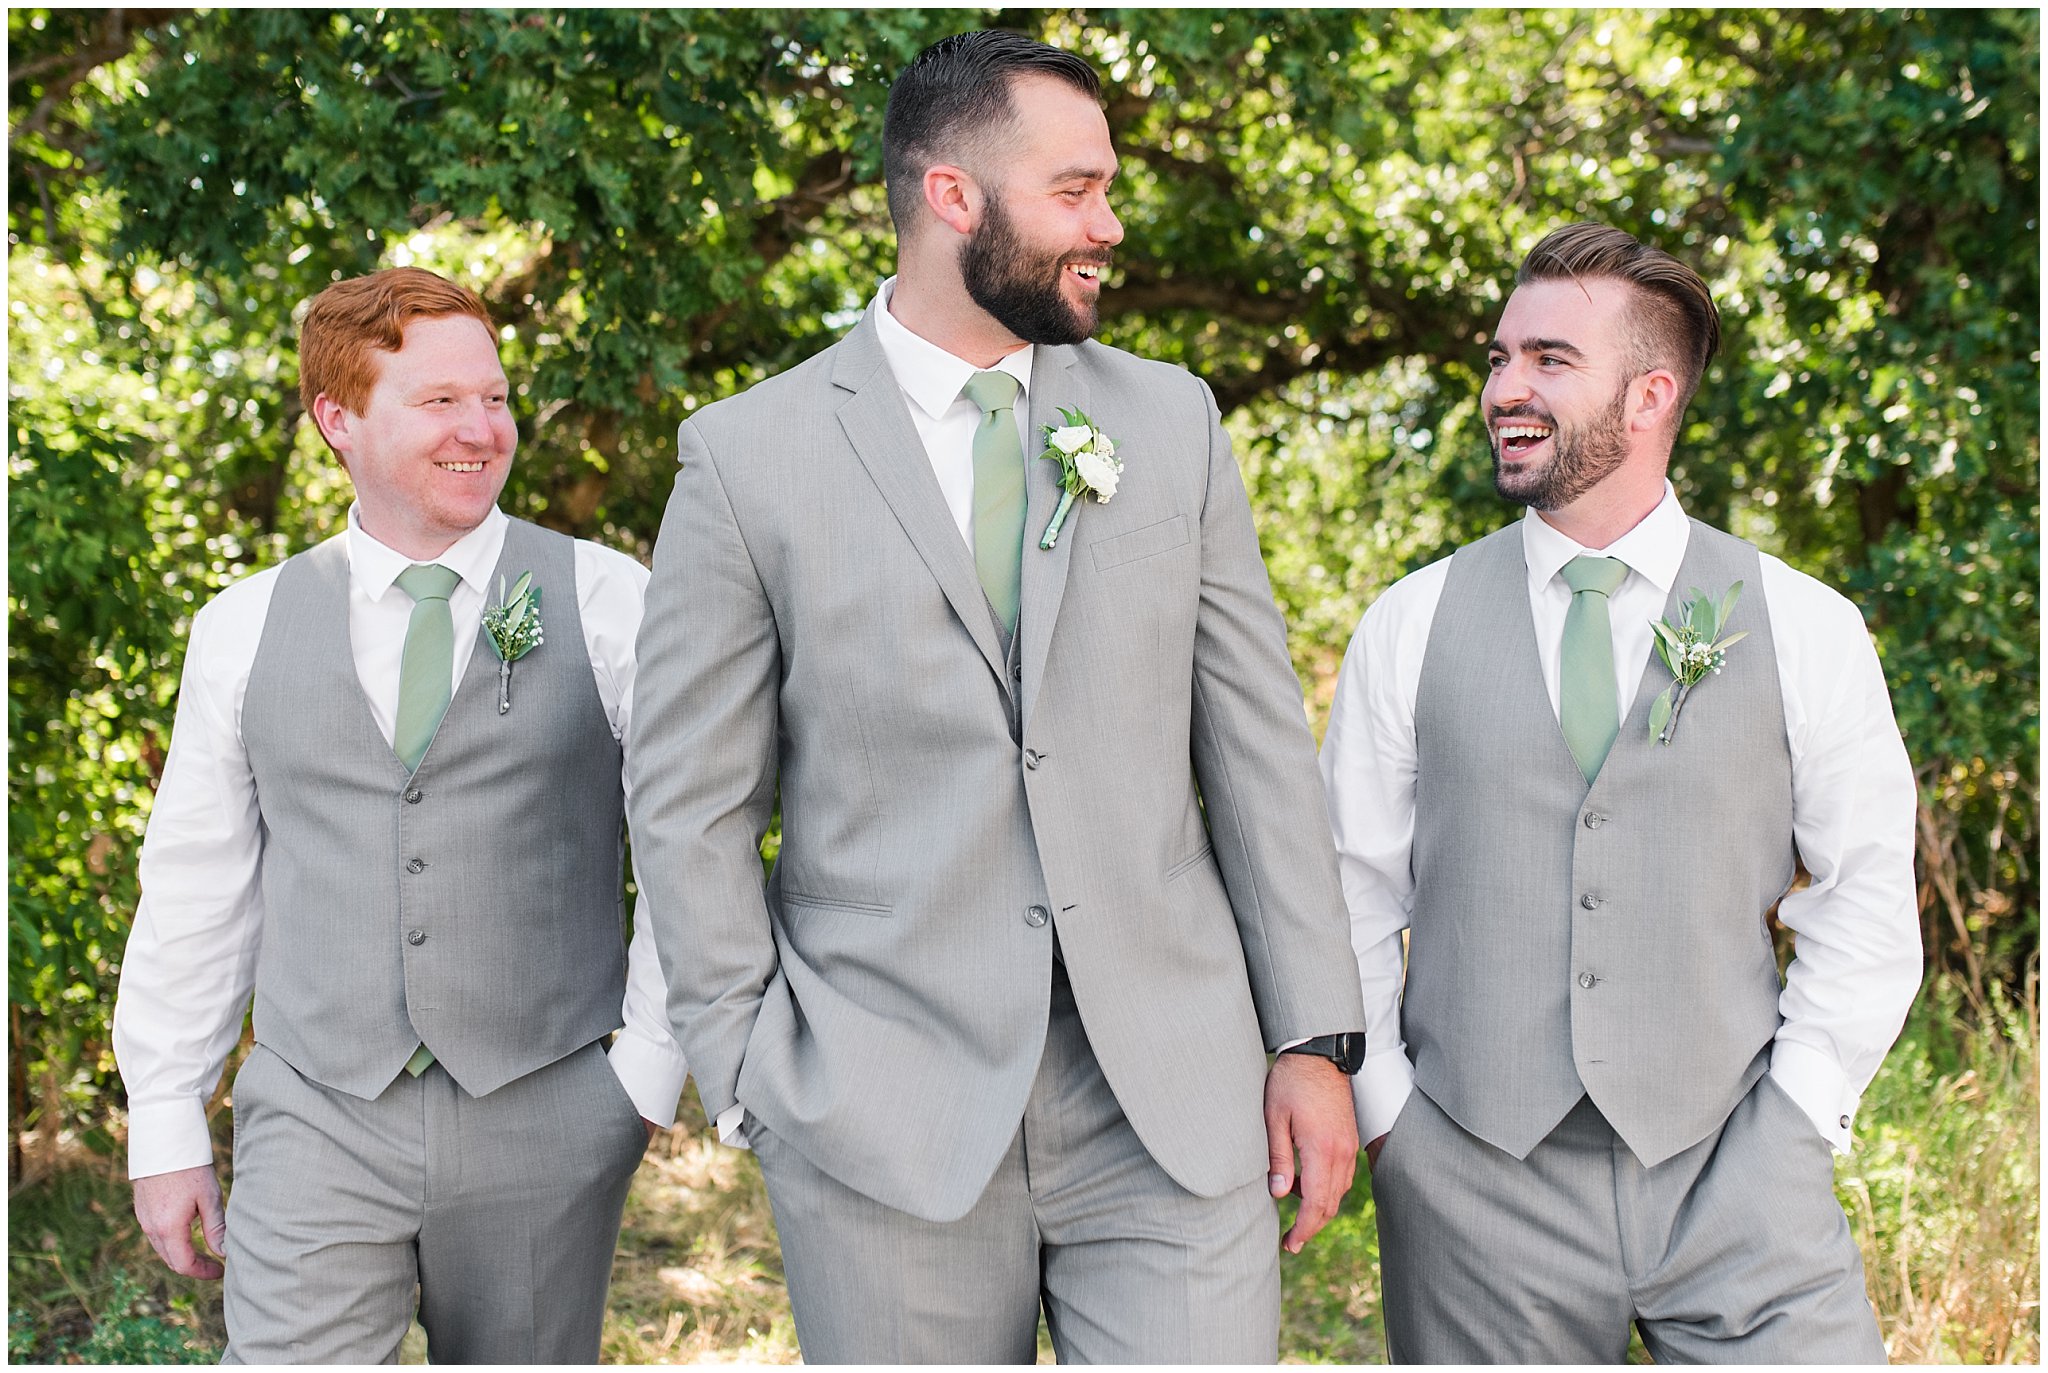 Wedding party in woods wearing gray suit and vests and sage green tie and champagne dress with sage green bridesmaid dresses | Sage Green and Gray Summer Wedding at Oak Hills | Jessie and Dallin Photography